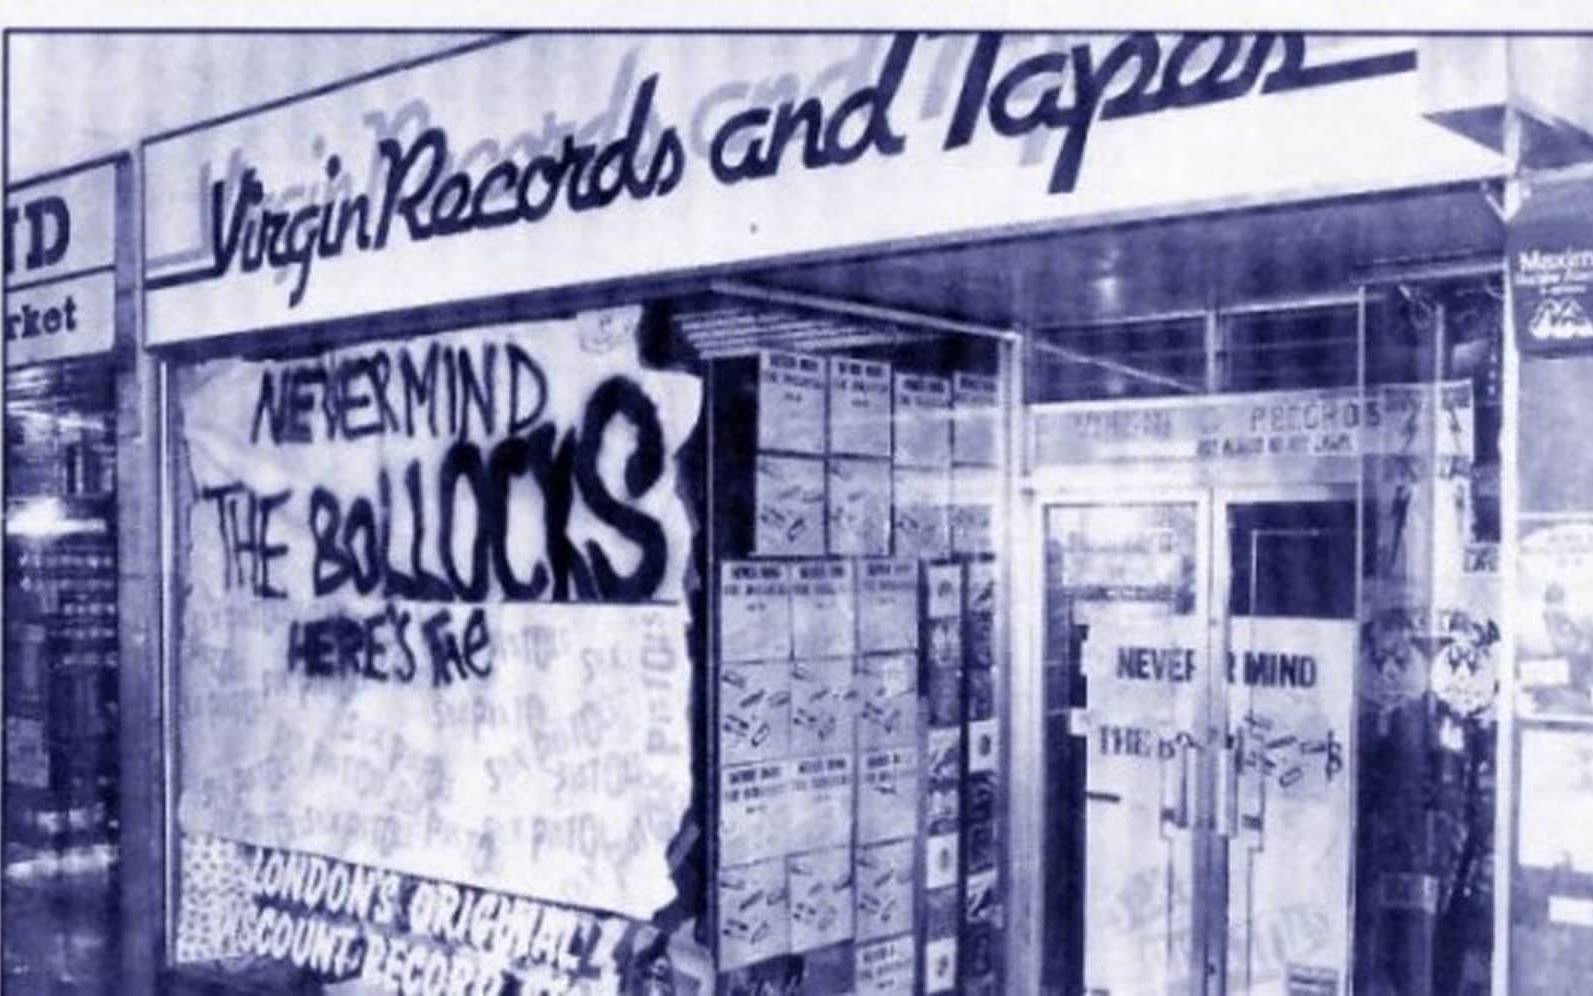 Black and white photo of Virgin Records storefront